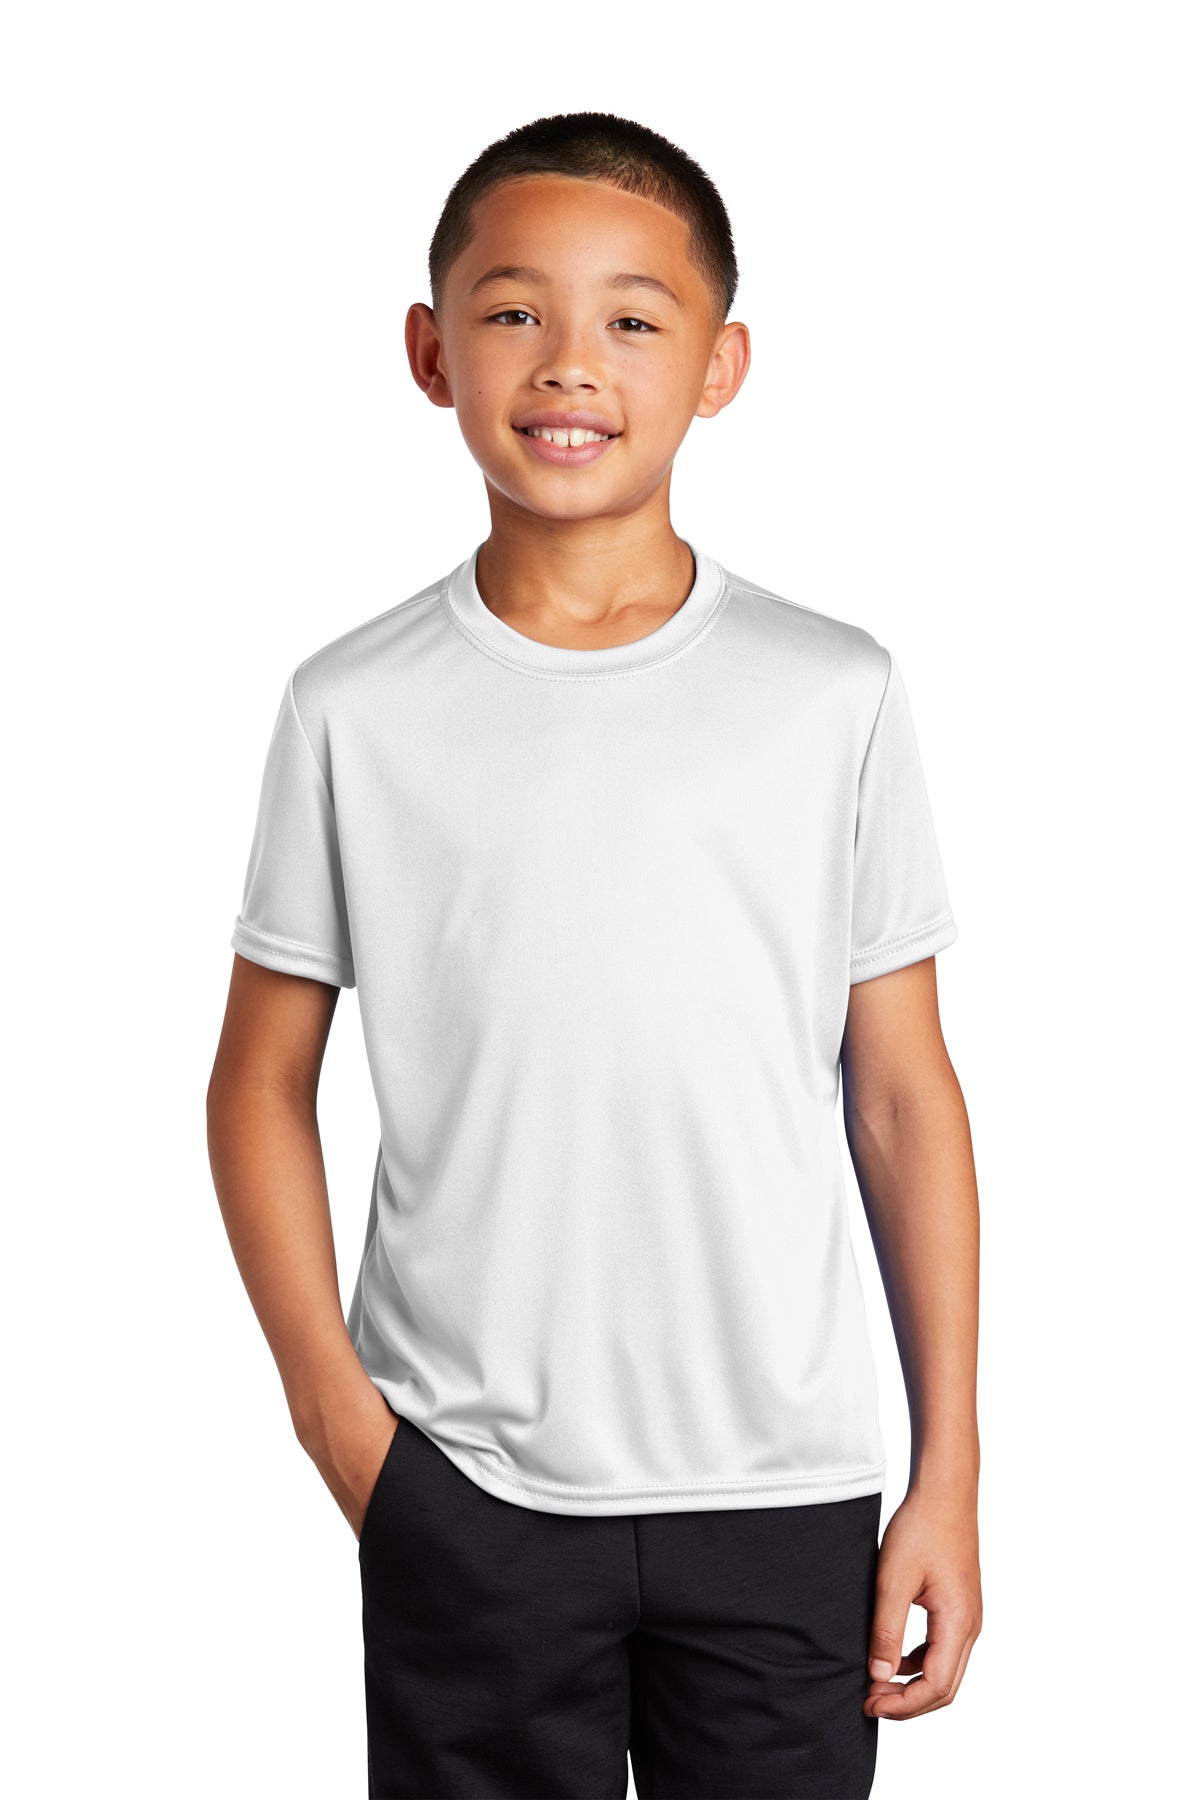 Port & Company Youth Performance Tee - XS White